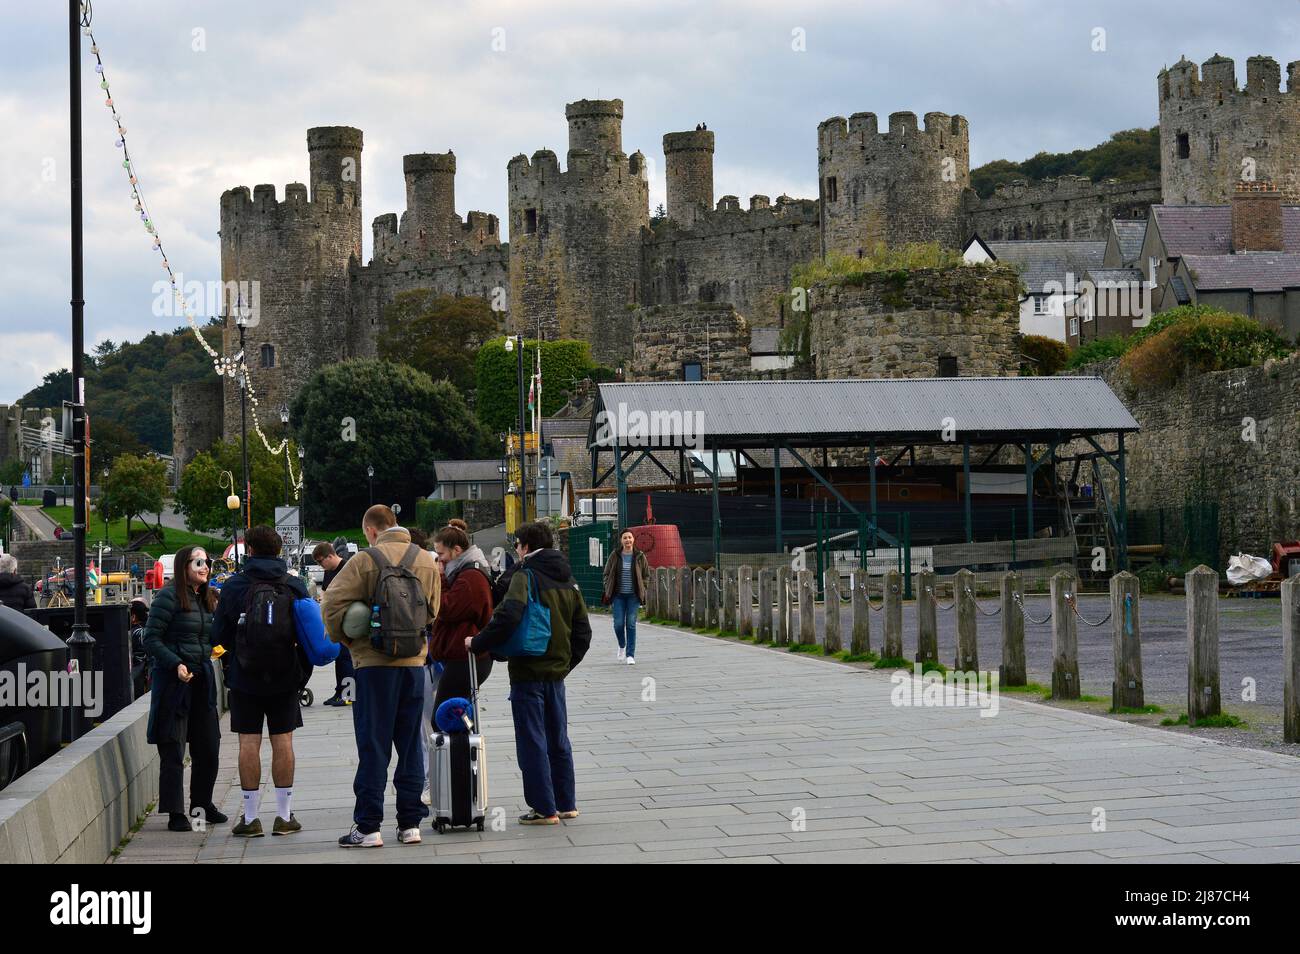 CONWY; CONWY COUNTY; WALES; 10-16-21. The Harbour on the River Conwy with the town's impressive castle built by King Edward 1st in the background. Stock Photo